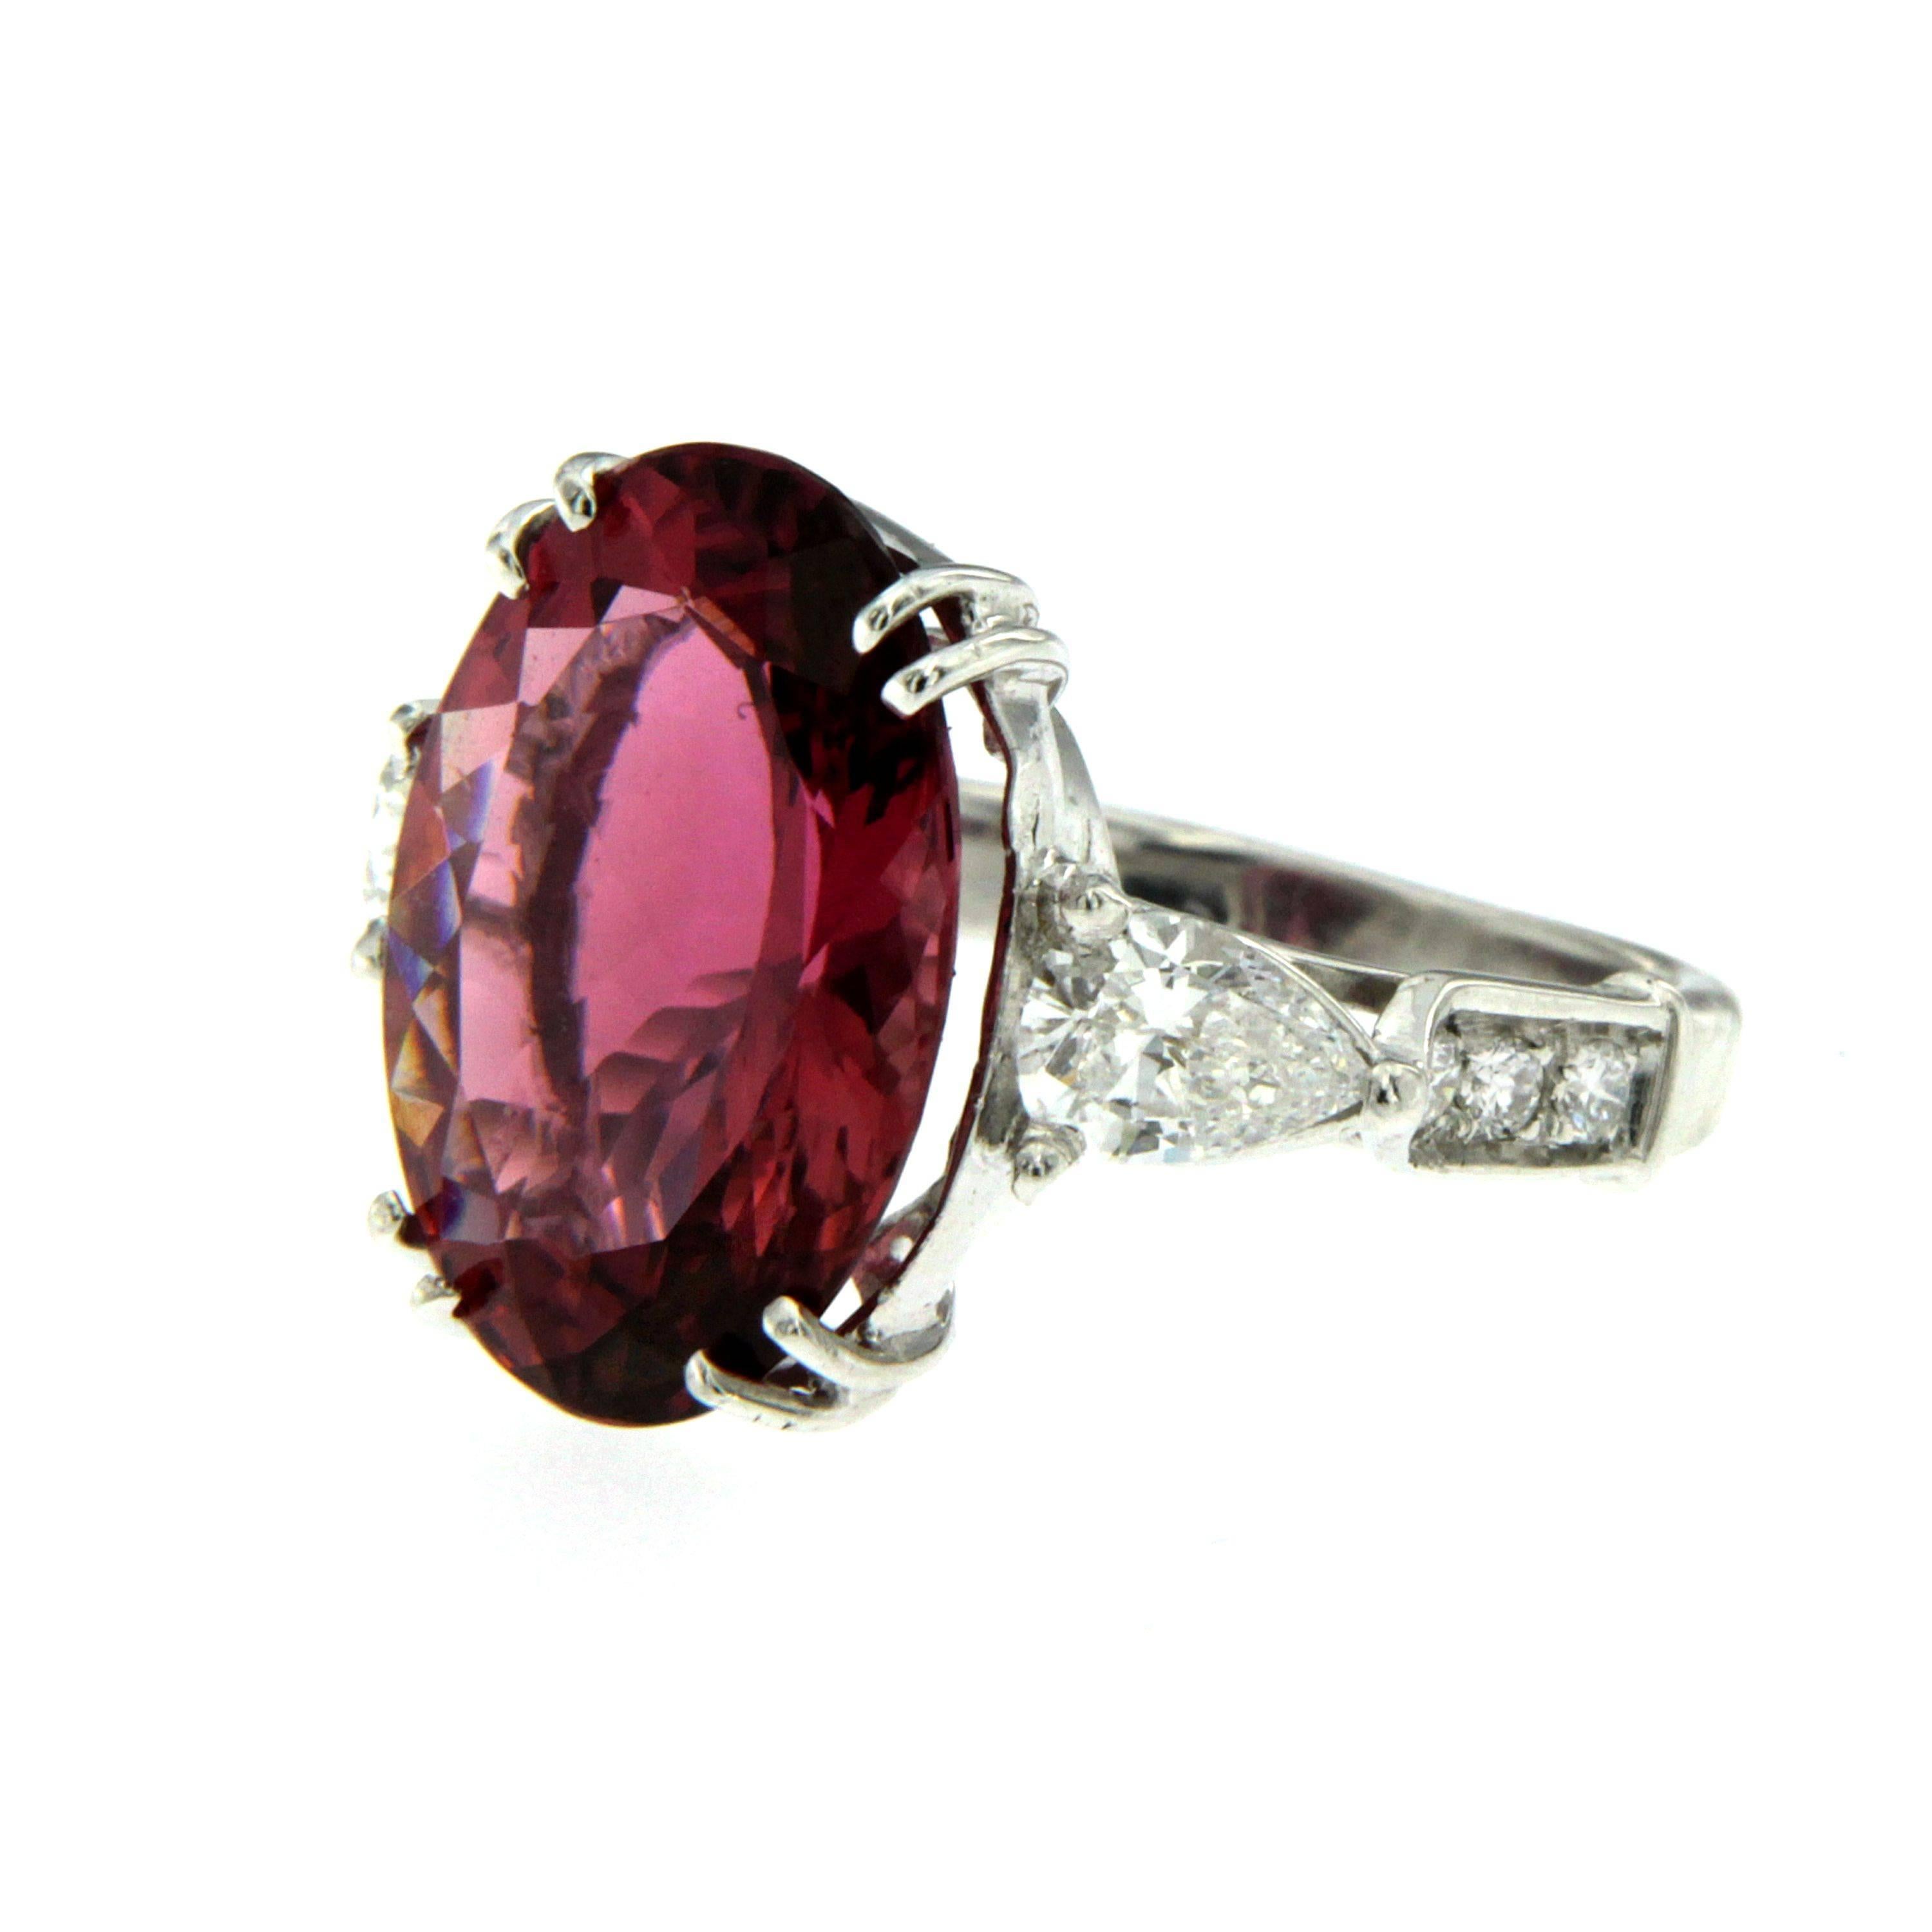 A stunning 18k white Gold ring with Rubellite Tourmaline and Diamonds. 
This beautiful ring from 1980 features a large 7.20 Carat Oval Mixed Cut Rubellite Tourmaline with a vibrant and rich color flanked by two pear cut diamond with an approx.